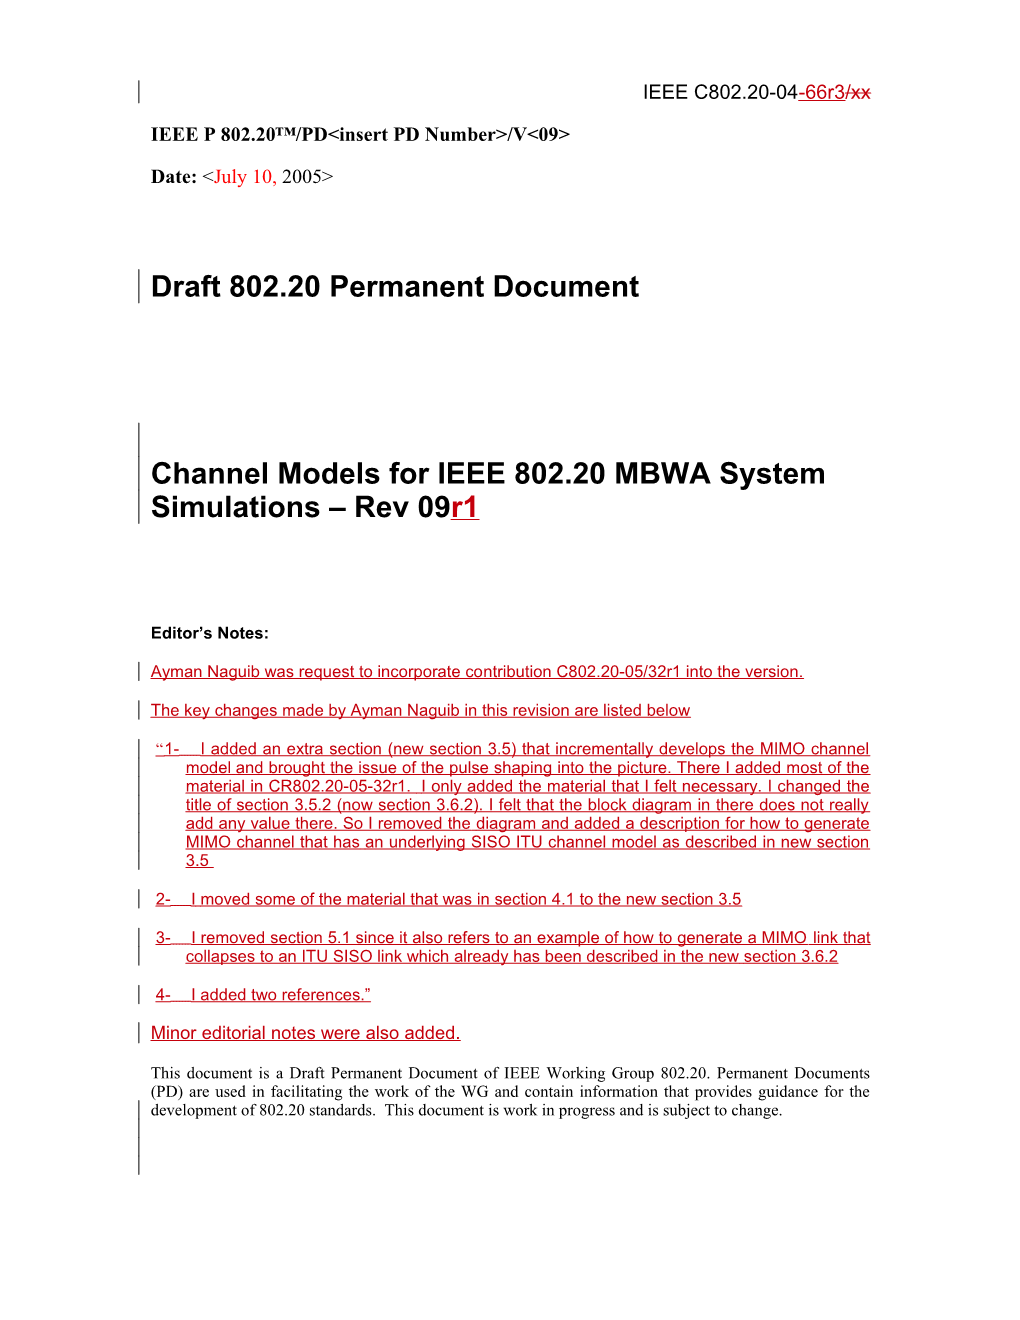 IEEE802.20 Ch Modeling Contri V04